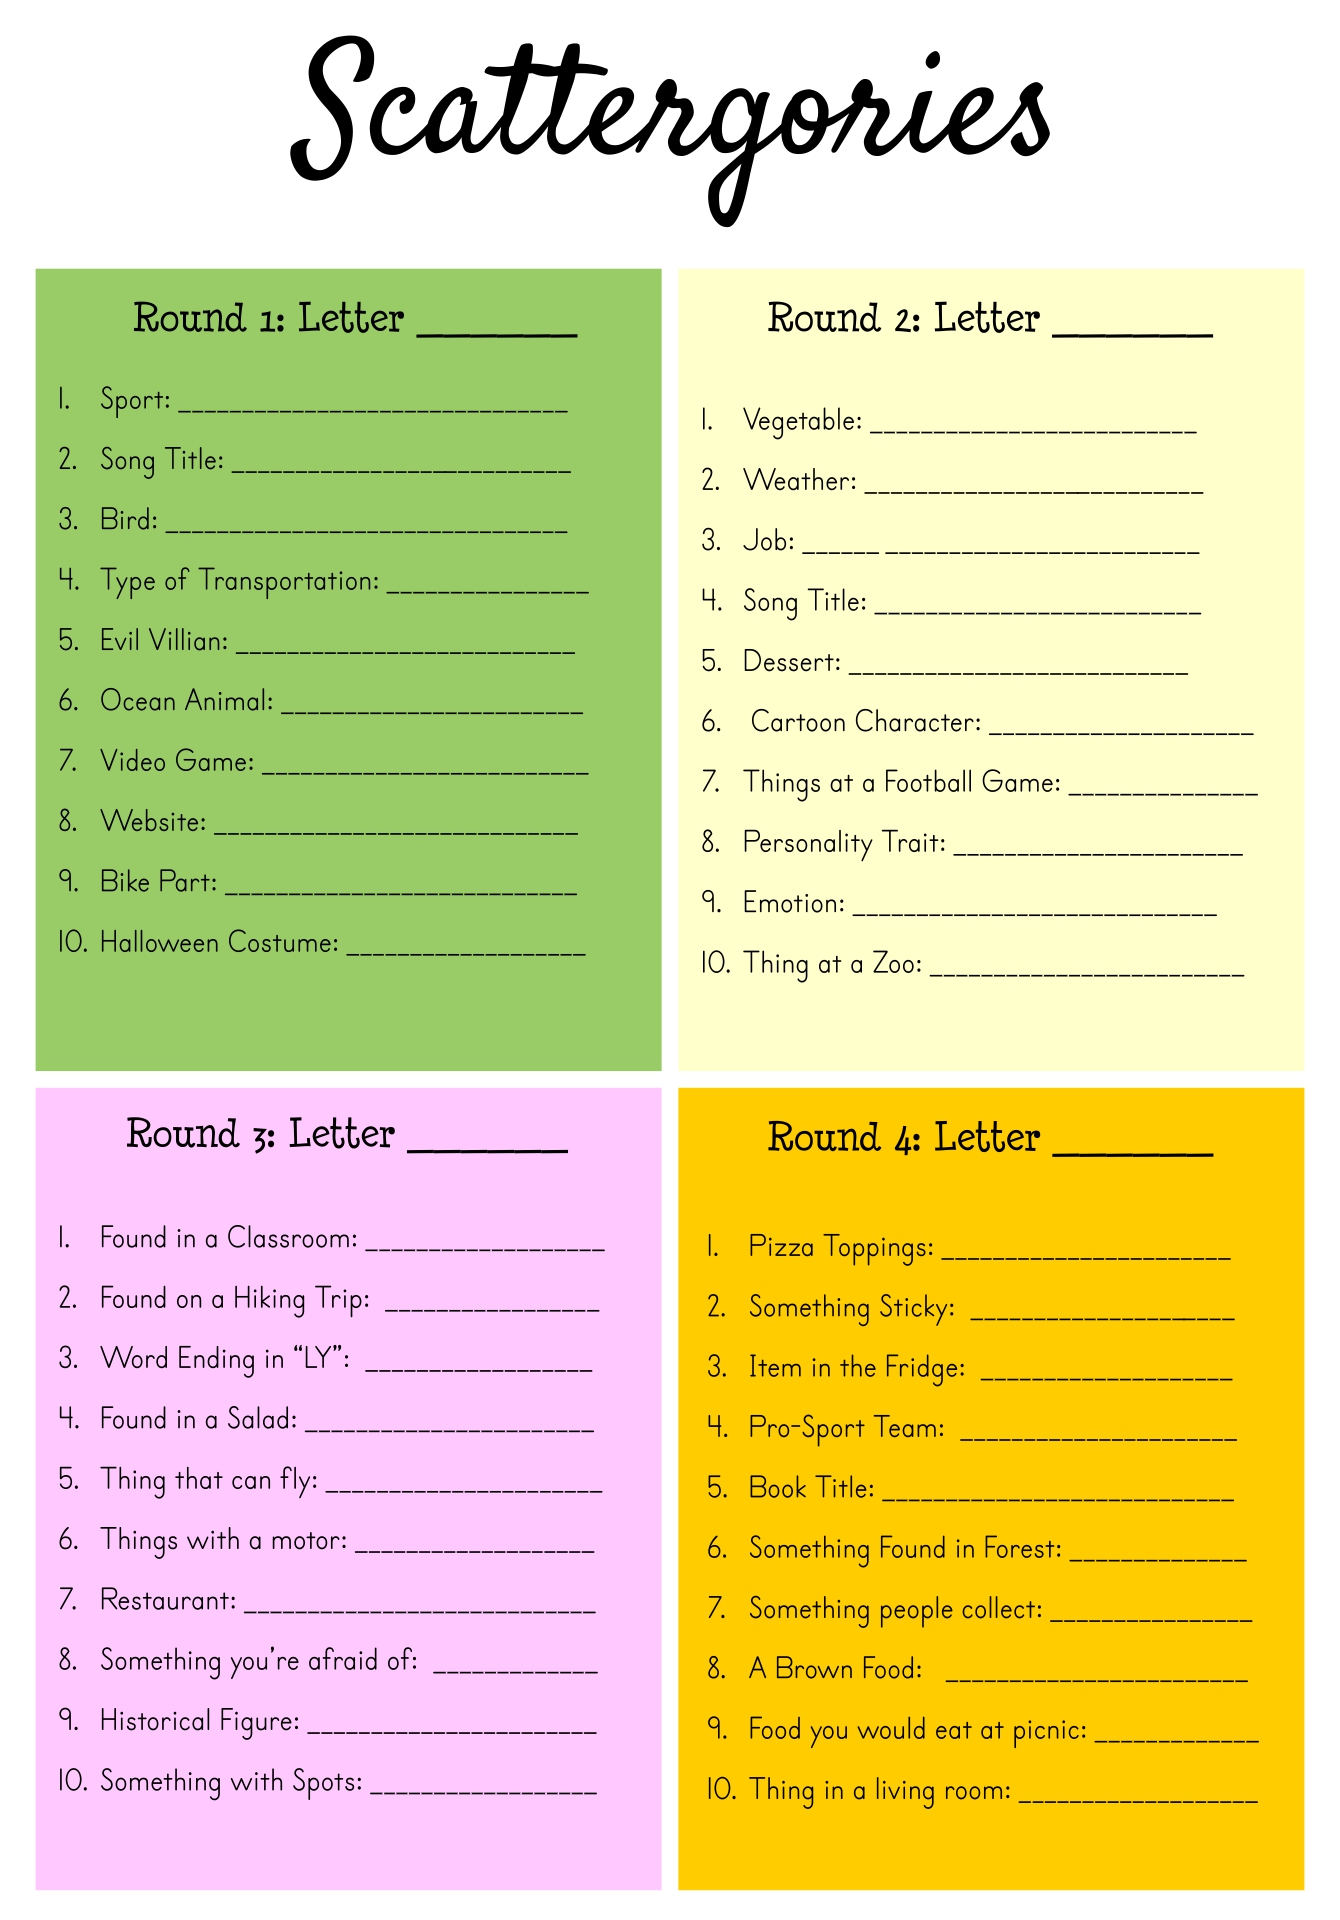 8-best-images-of-scattergories-printable-worksheets-printable-scattergories-categories-list